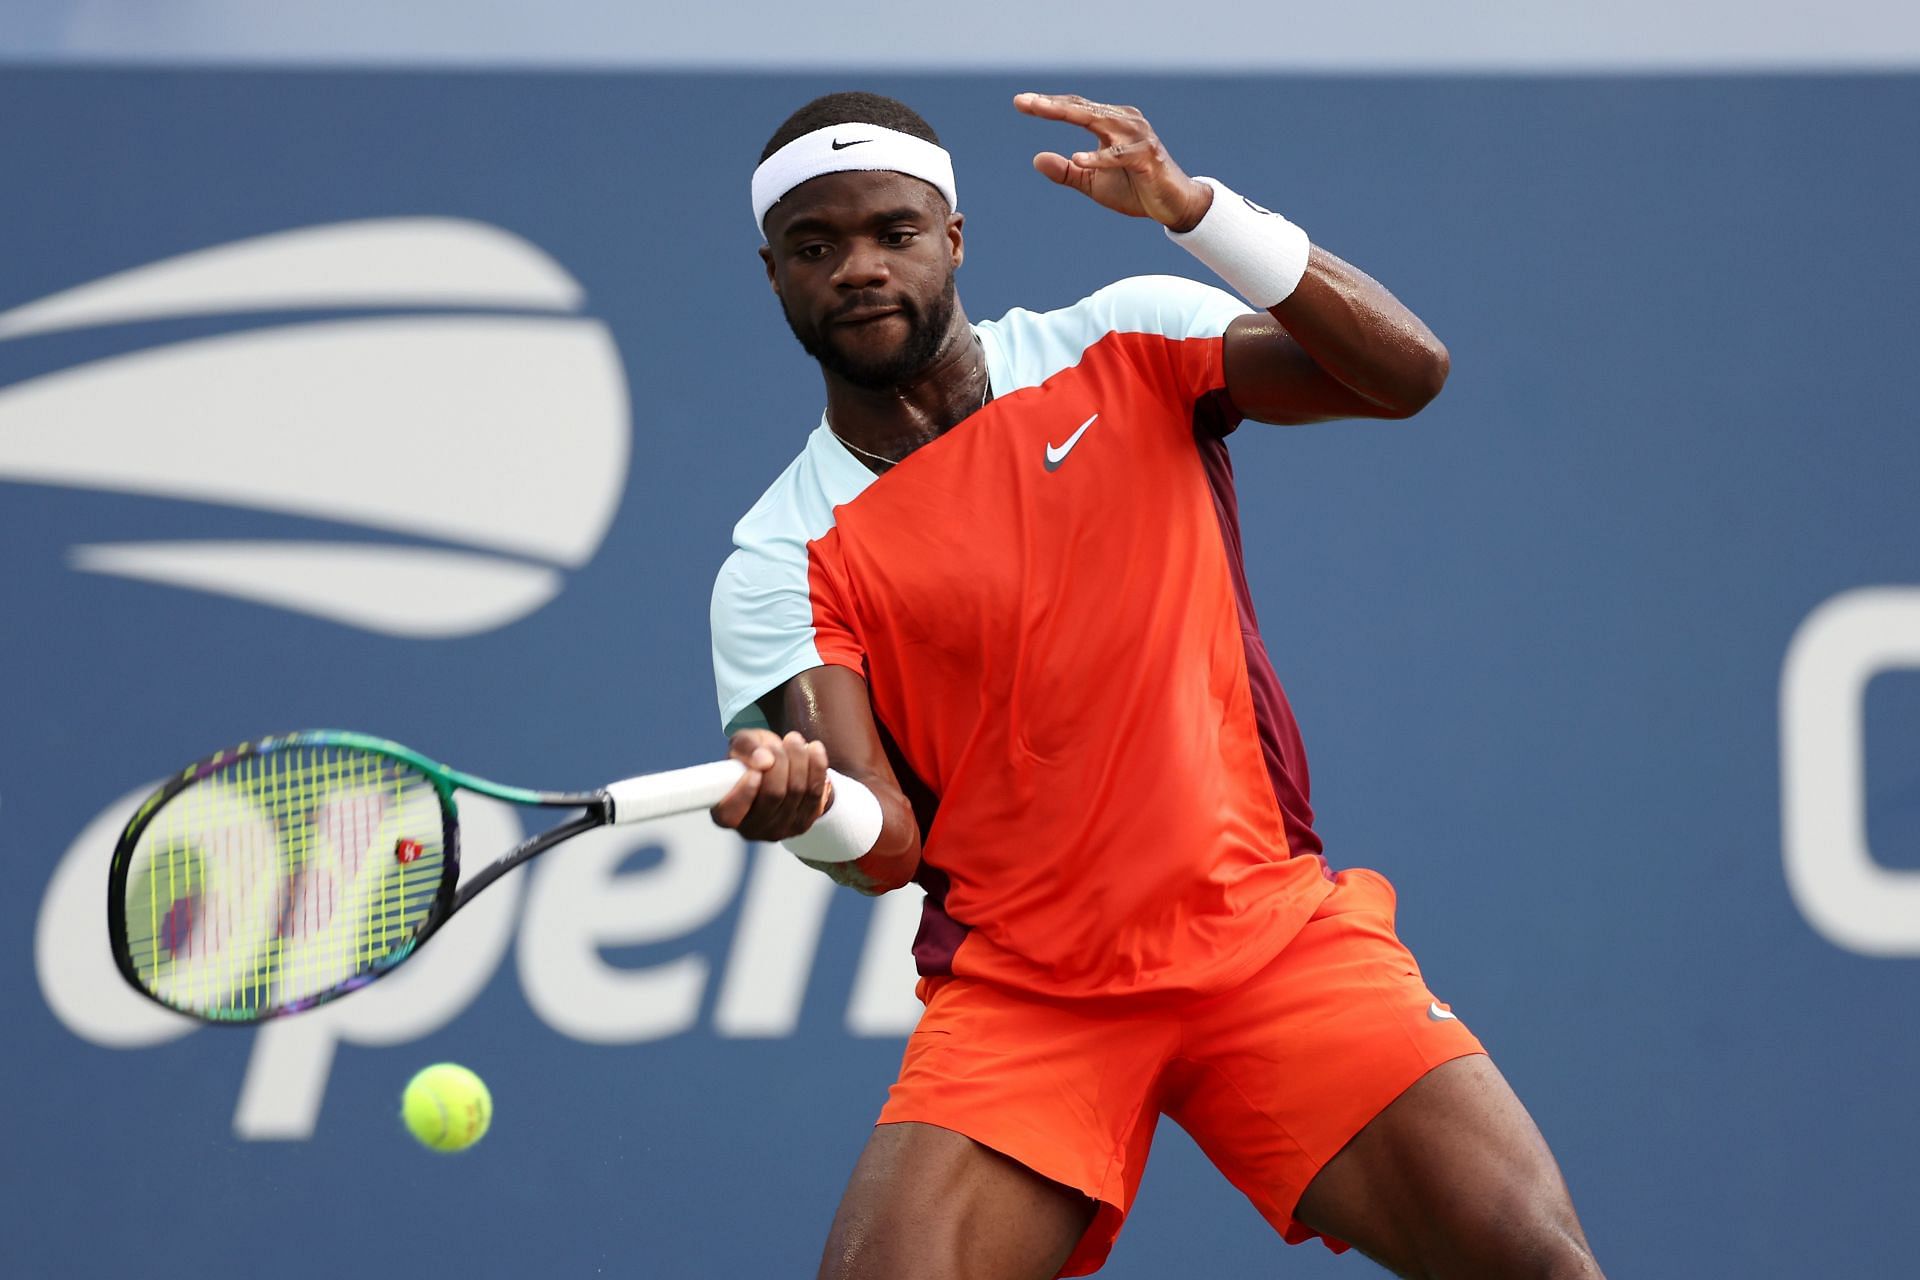 Frances Tiafoe in action at the 2022 US Open.